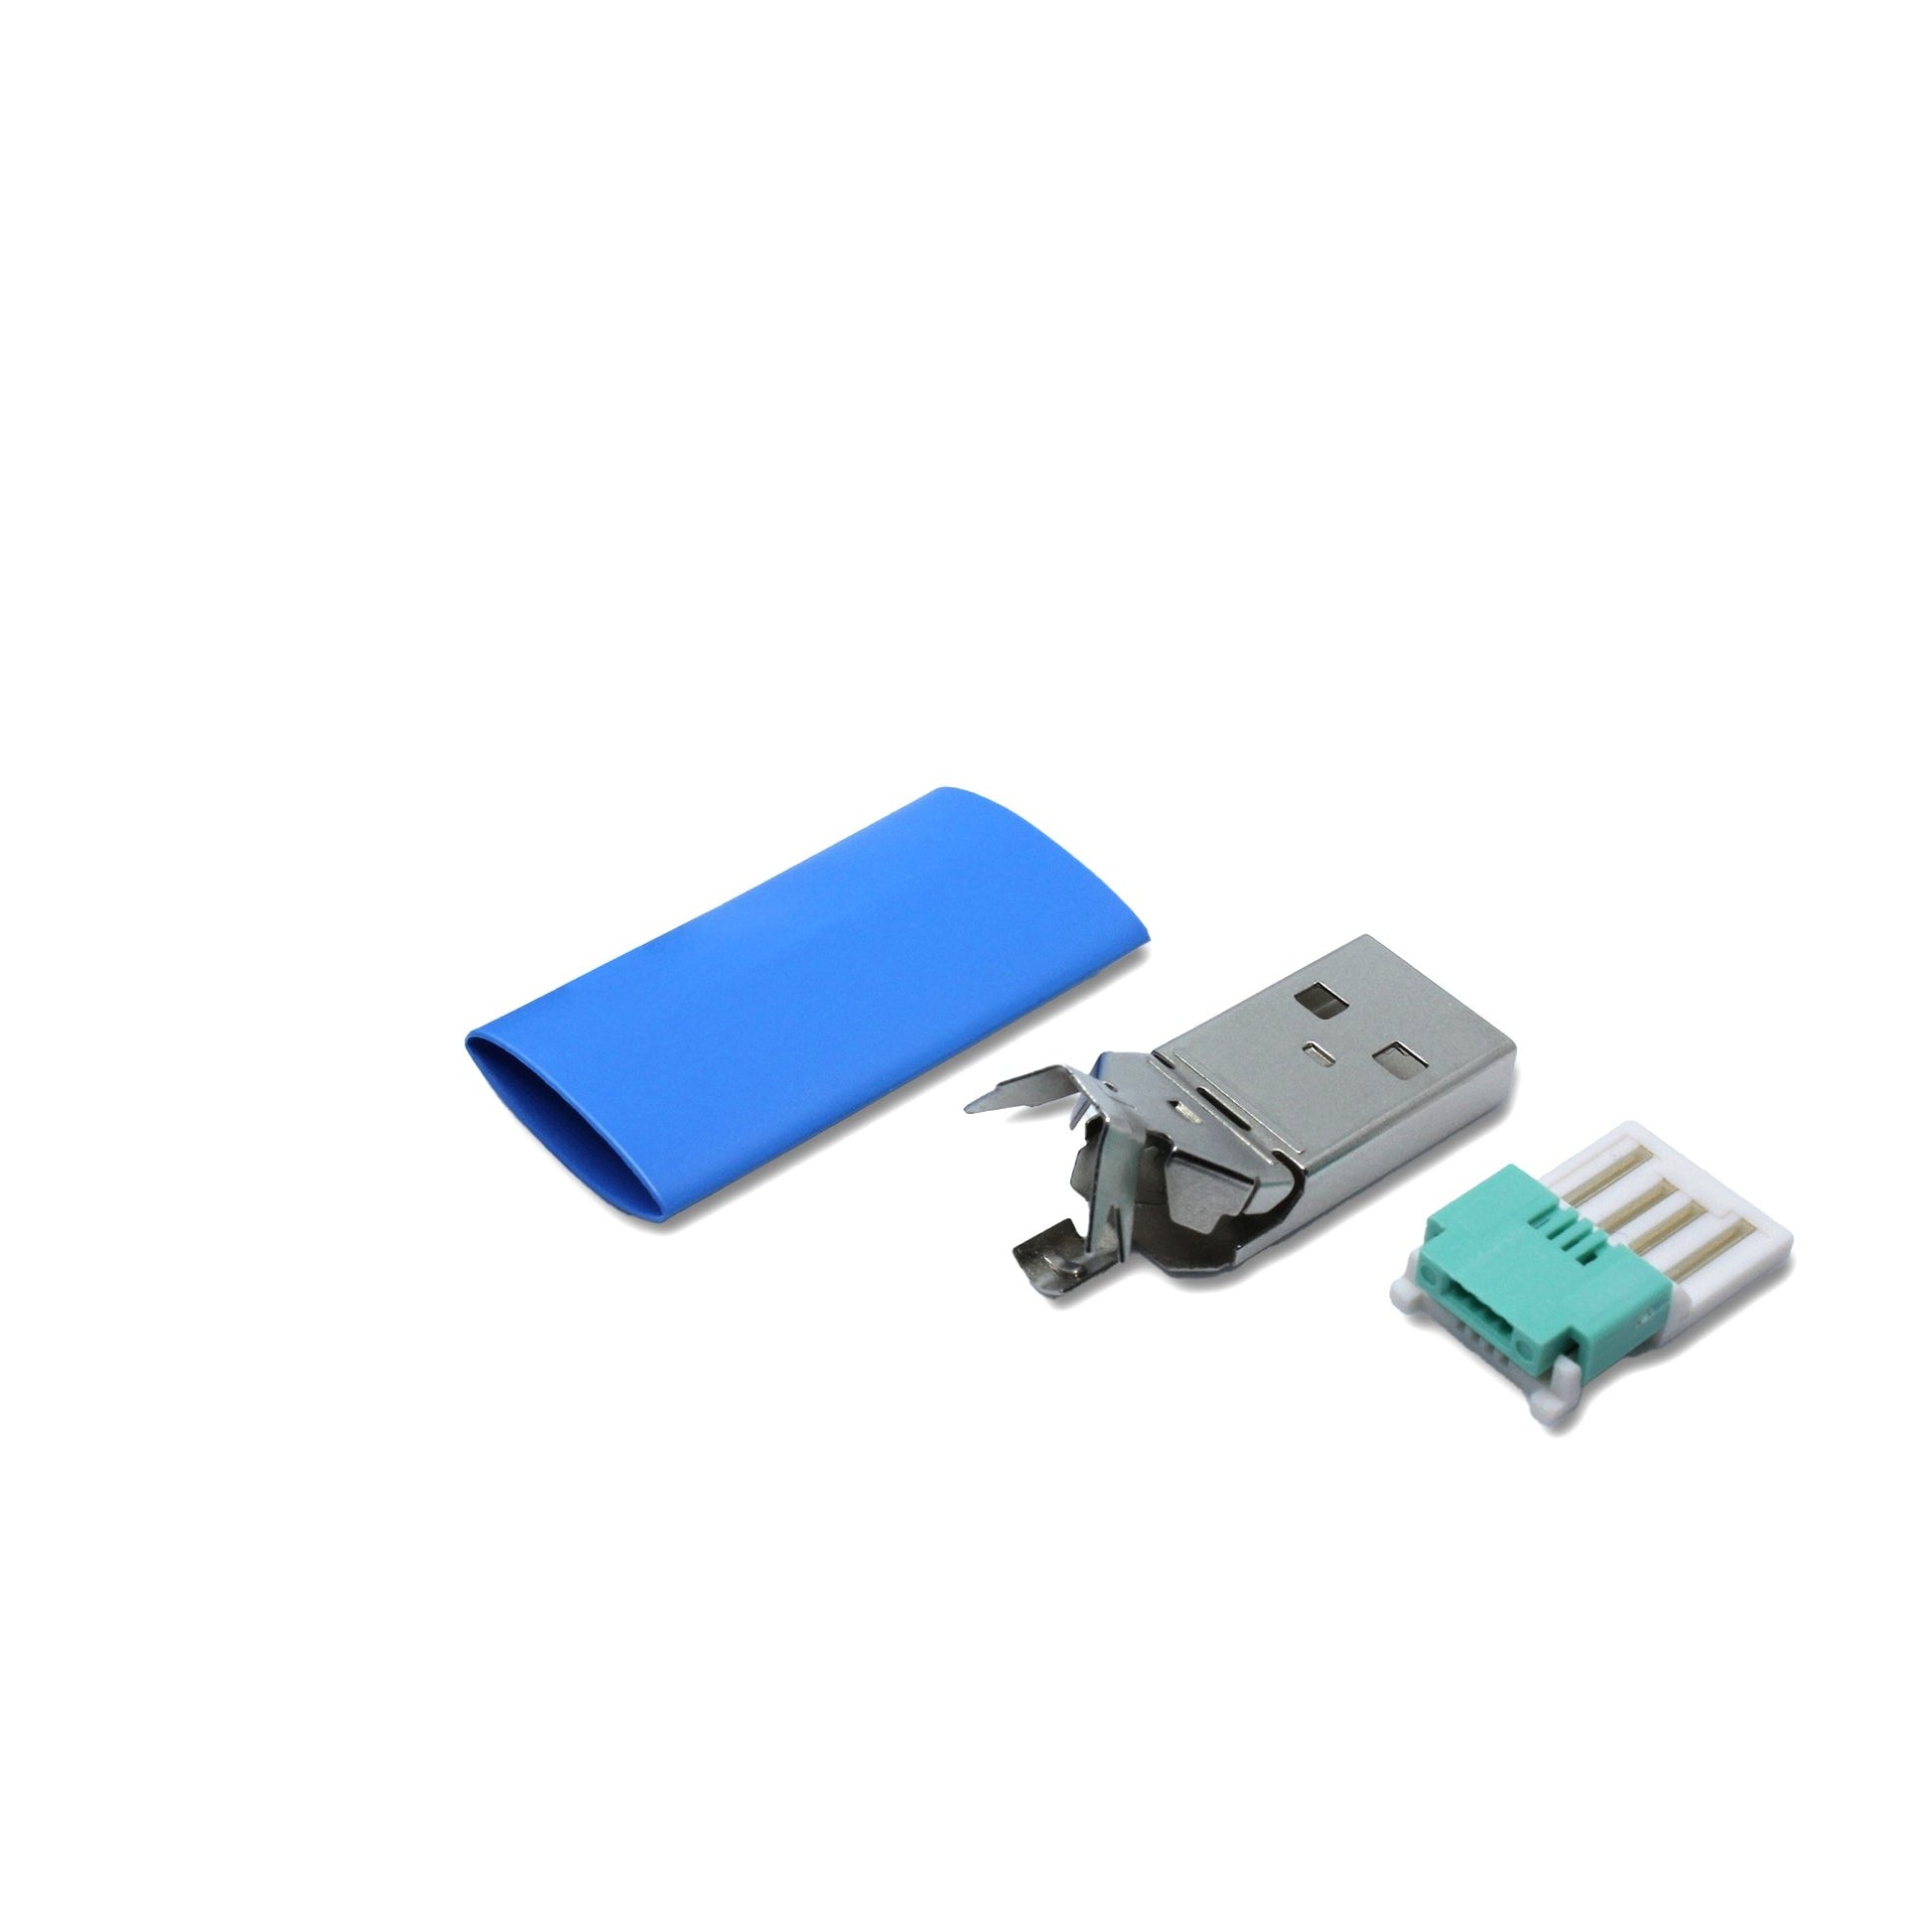 Individual parts USB A plug in blue, the spare part can be used to repair a USB 2.0 cable without soldering (crimping)